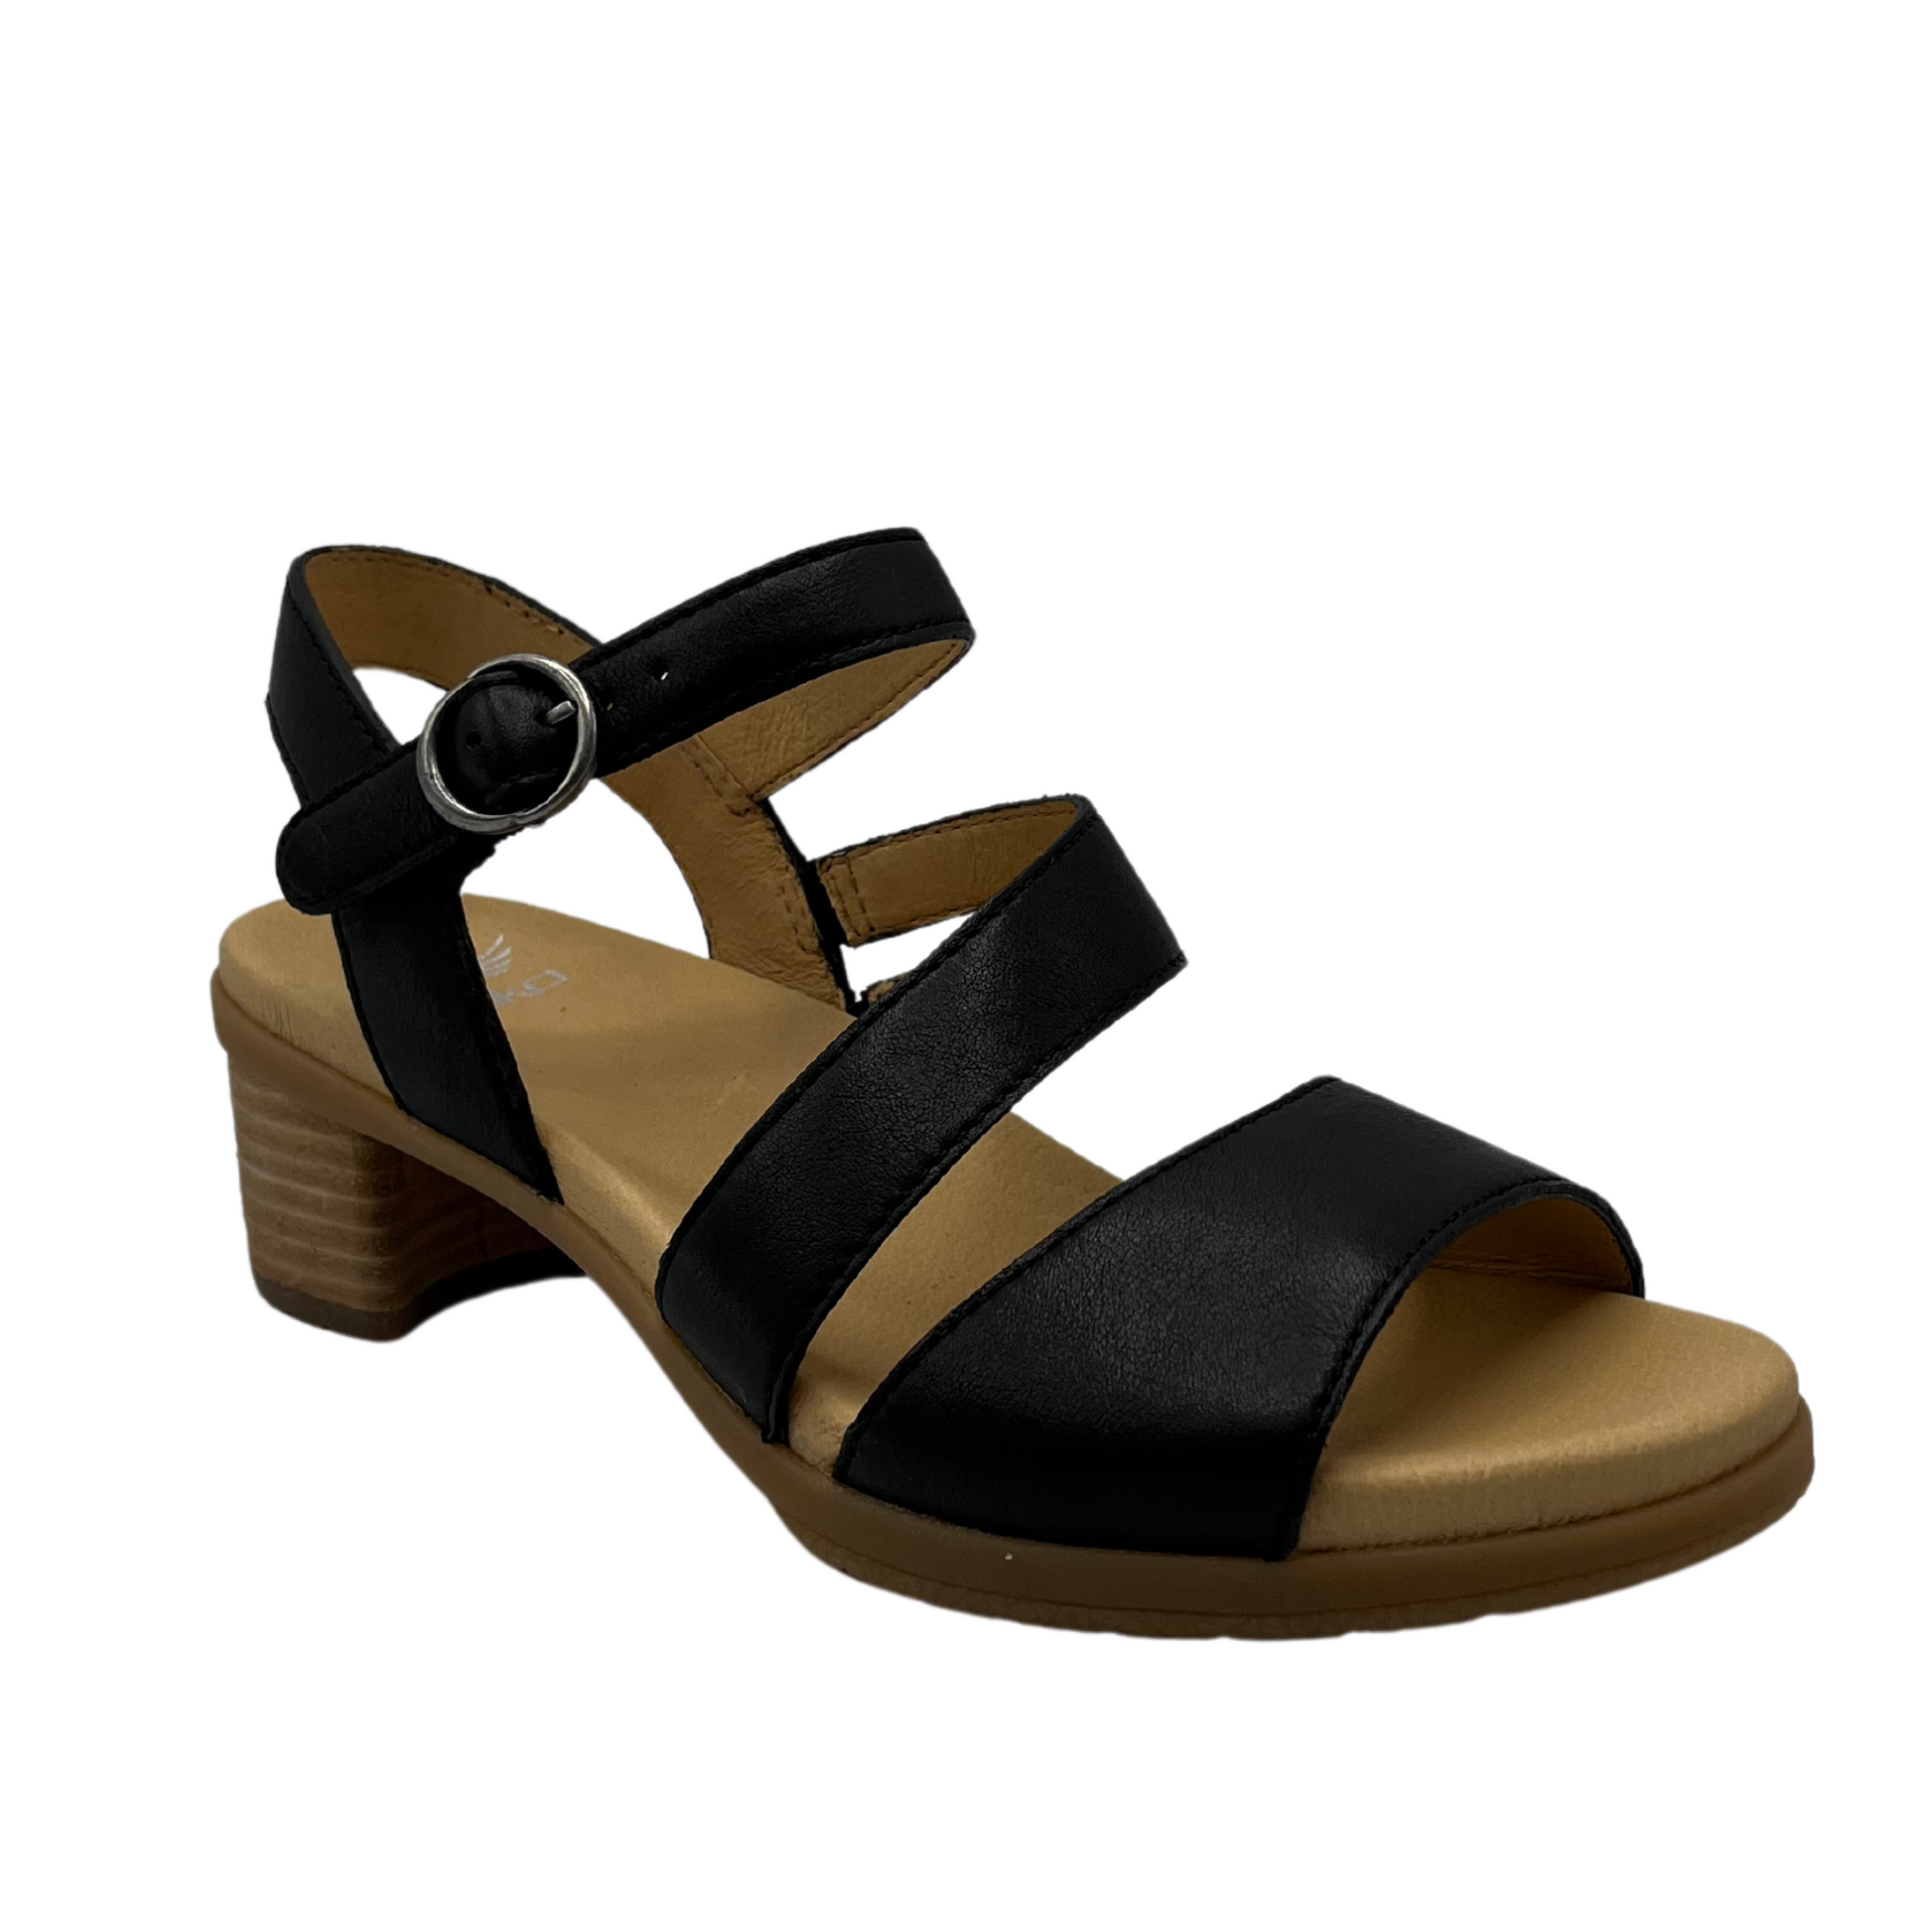 45 degree angled view of black leather sandal with leather lining and stacked heel